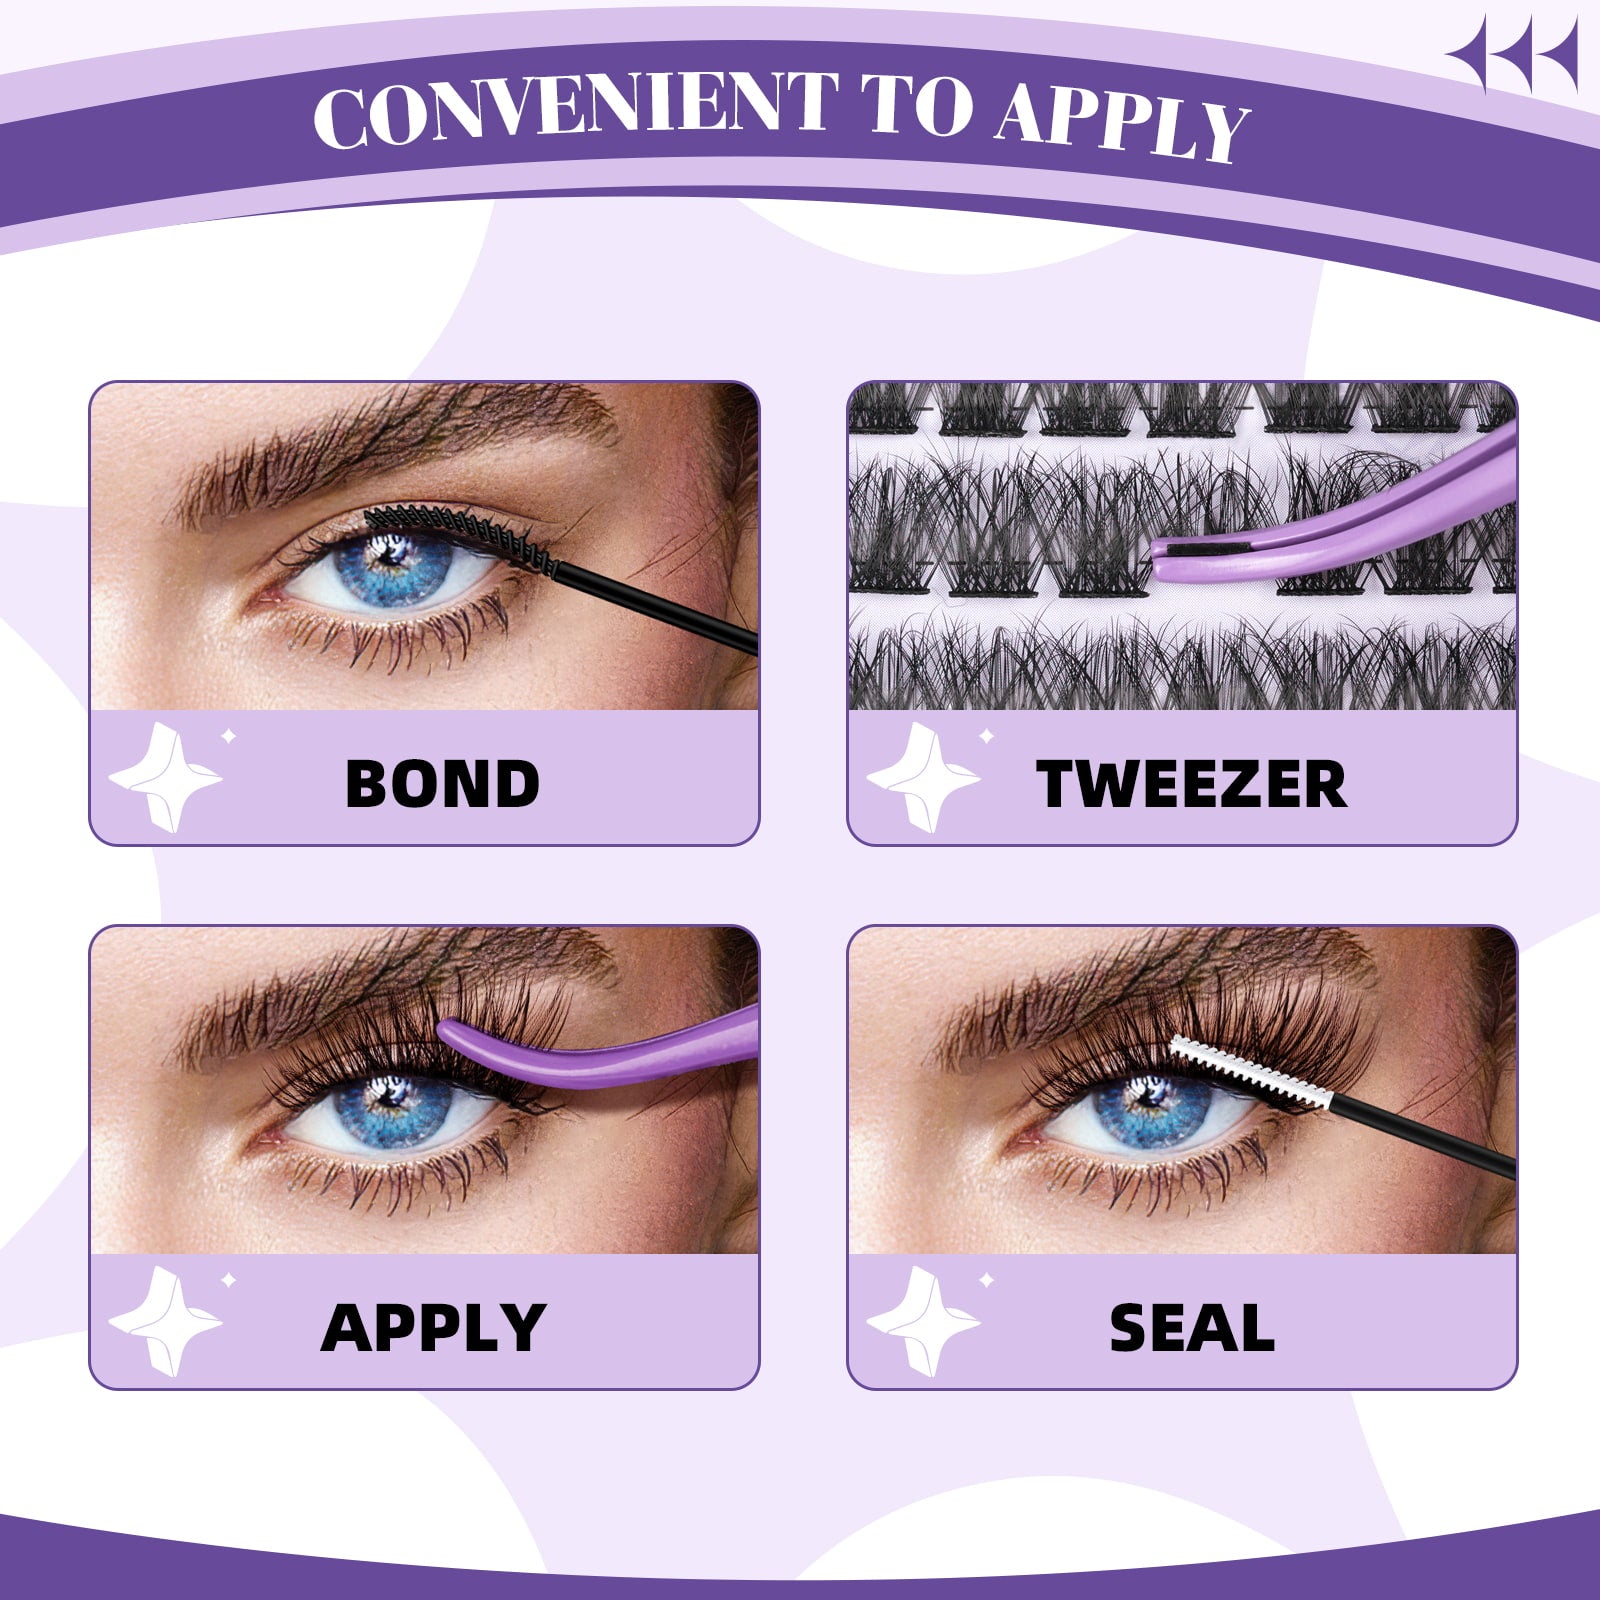 How to apply diy lashes: 1.apply bond 2. place lashes underneath own lashes 3.apply seal 